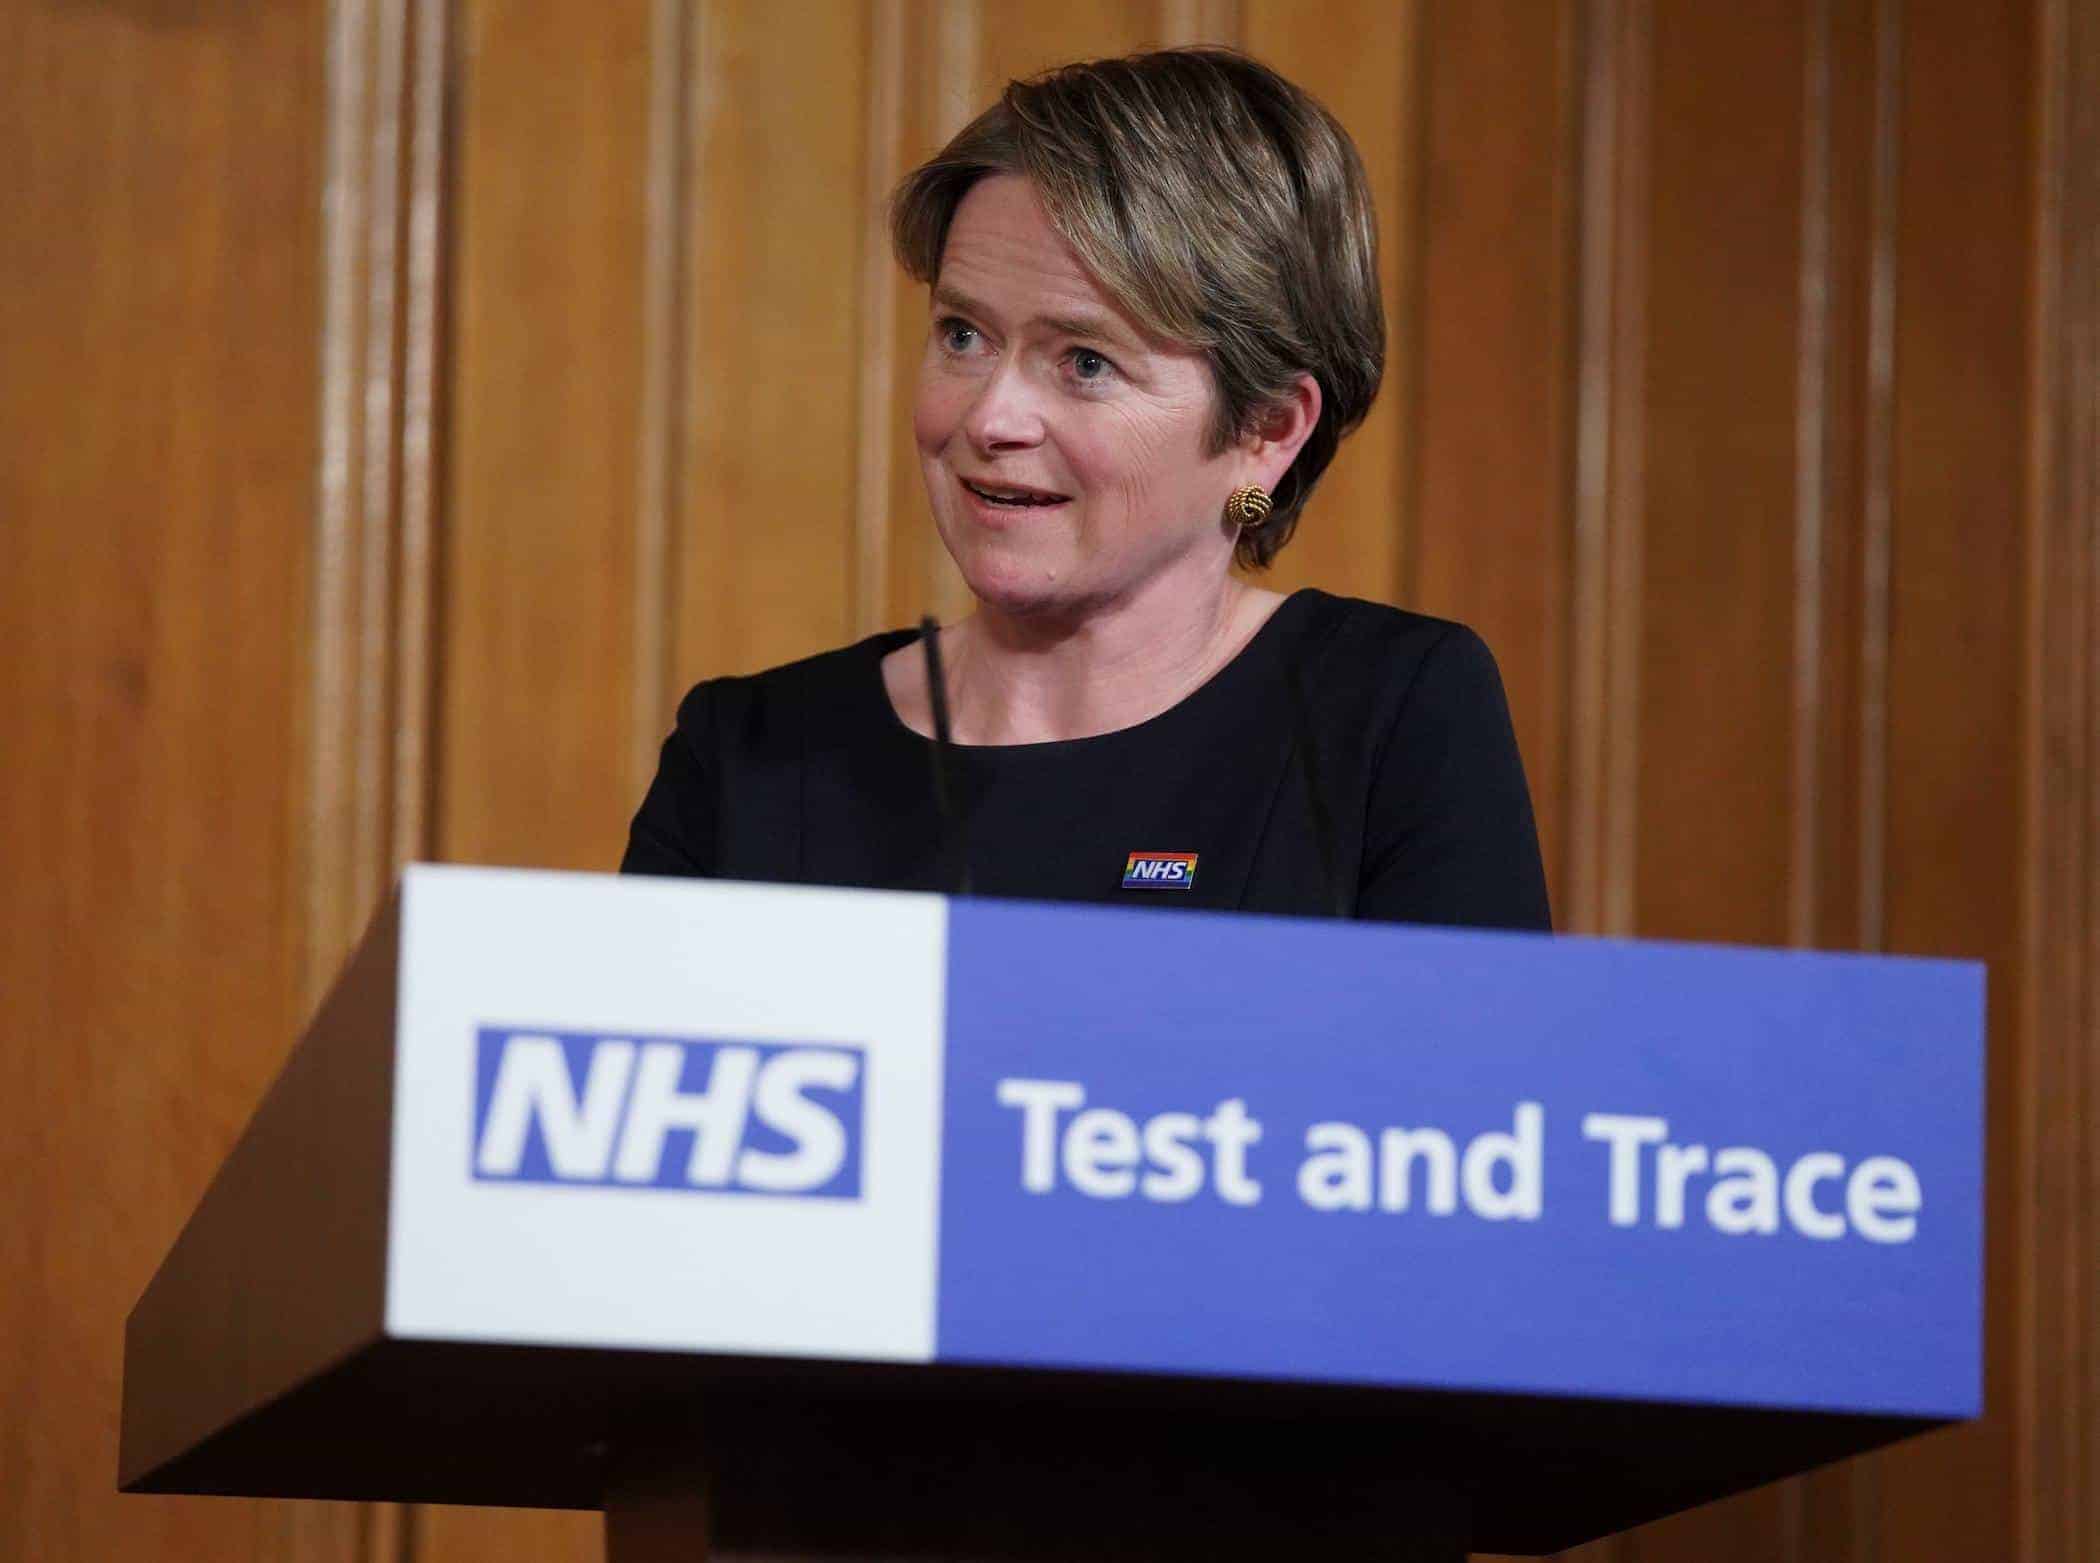 Public to pay for daily Covid-19 ‘moonshot’ tests, says Dido Harding